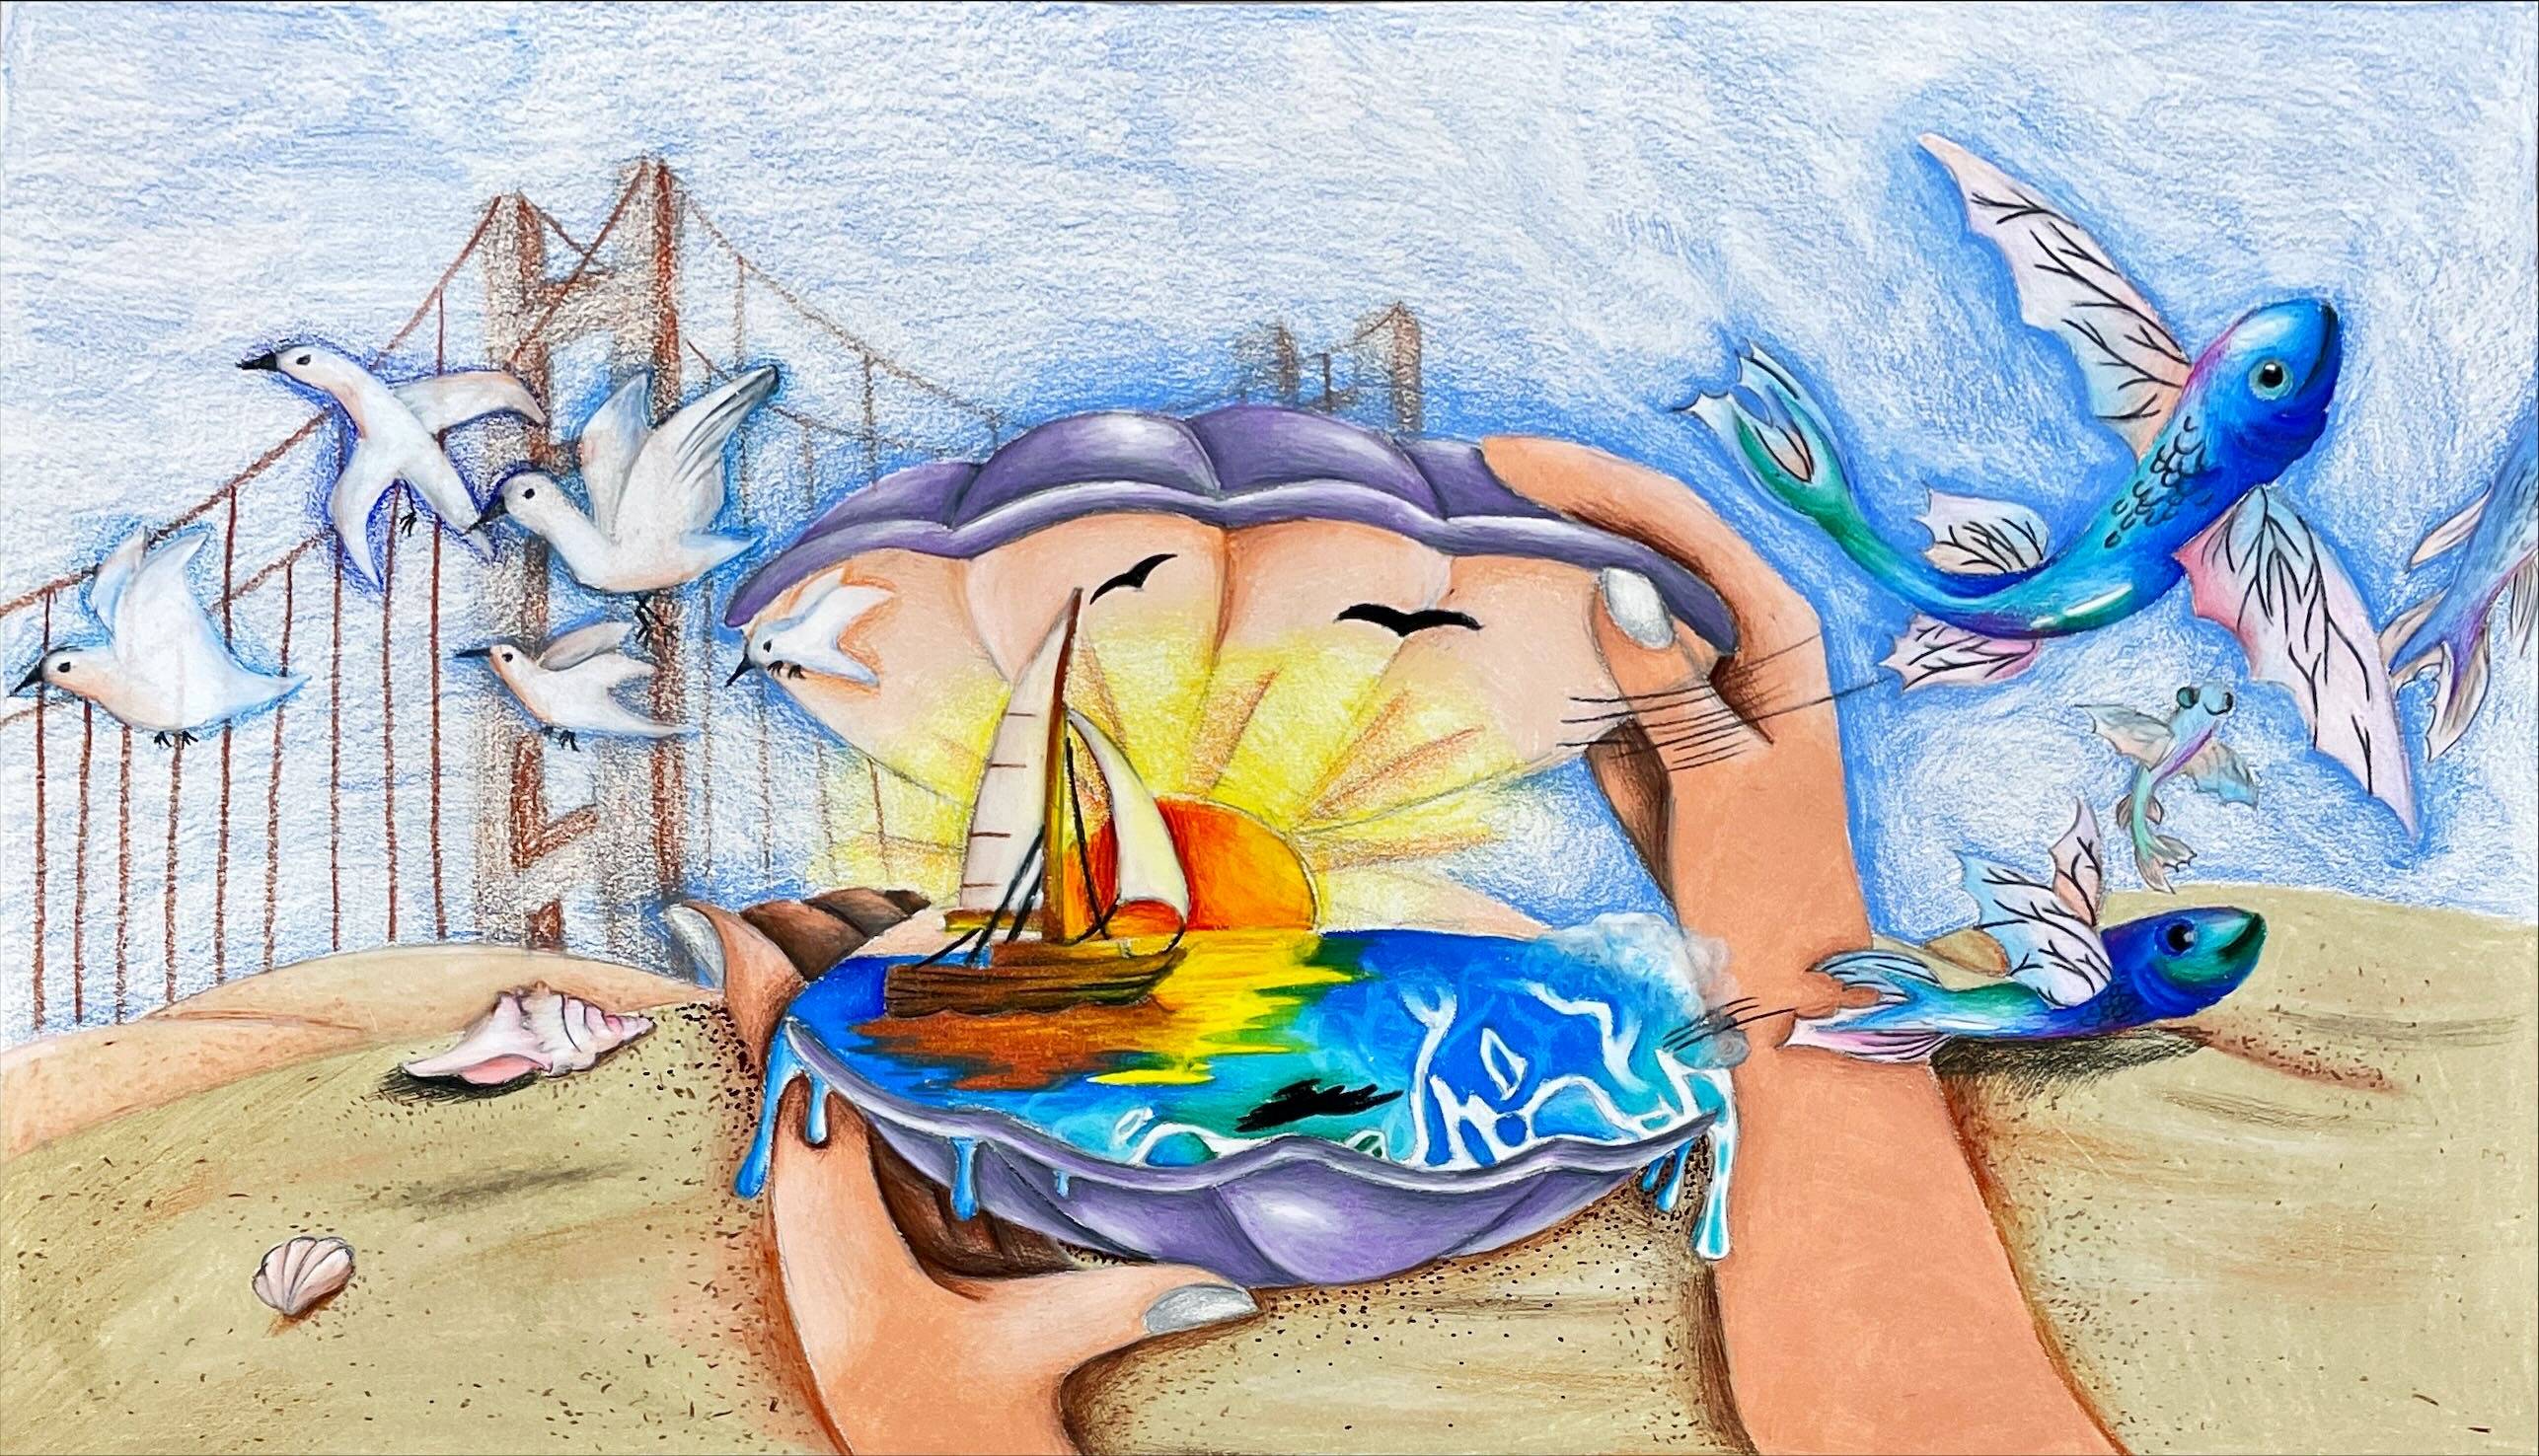 Two hands open a scallop shell. Inside is a setting sun and a sailboat. Flying fish leap around the shell and birds fly by. A bridge is in the background.